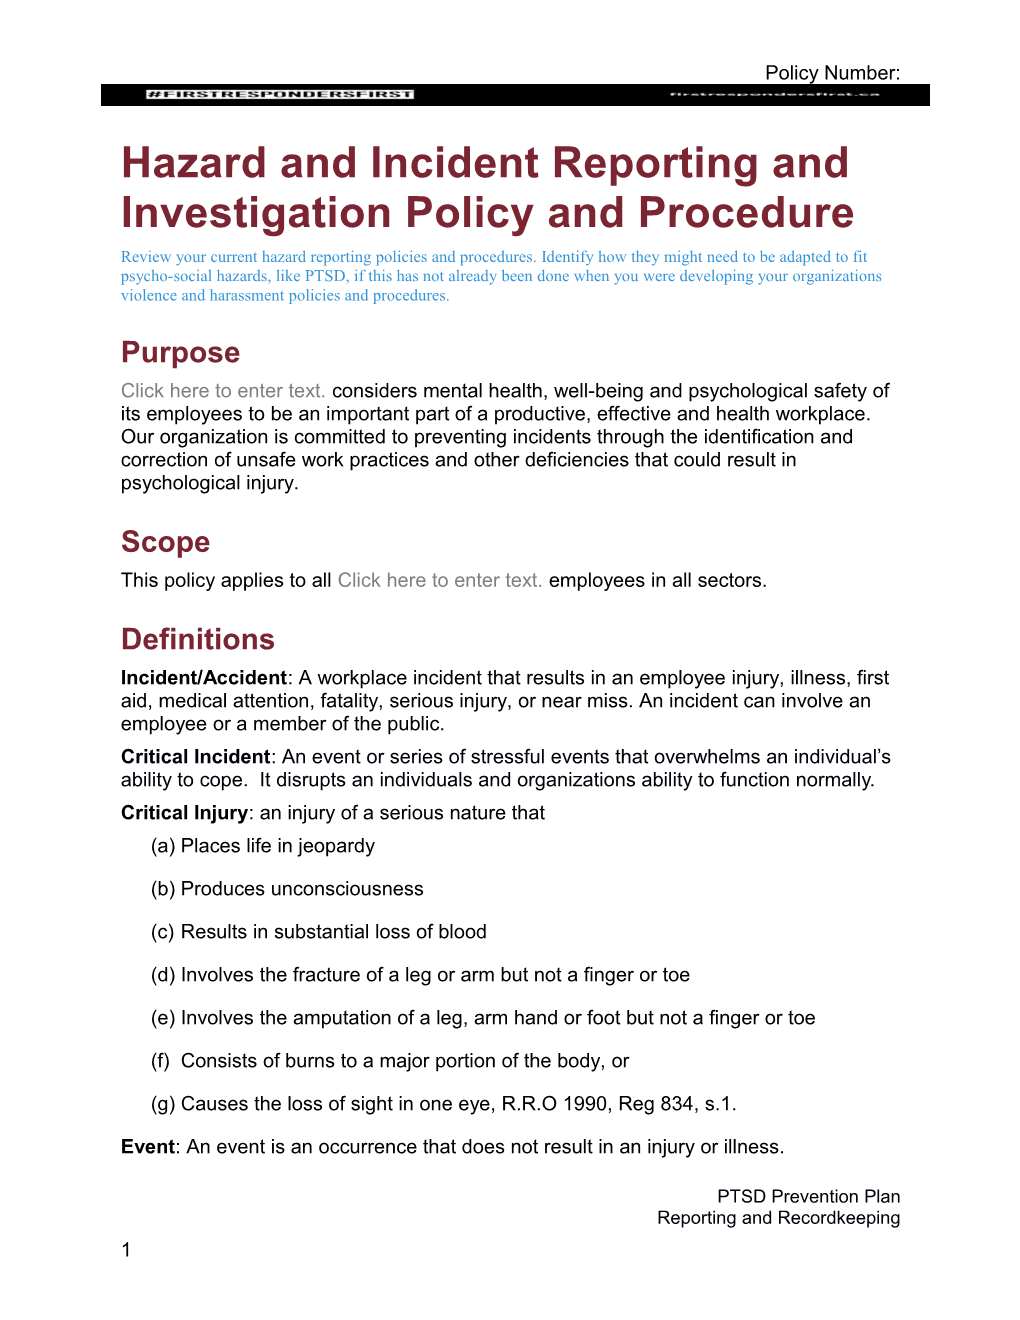 Hazard and Incident Reporting and Investigation Policy and Procedure